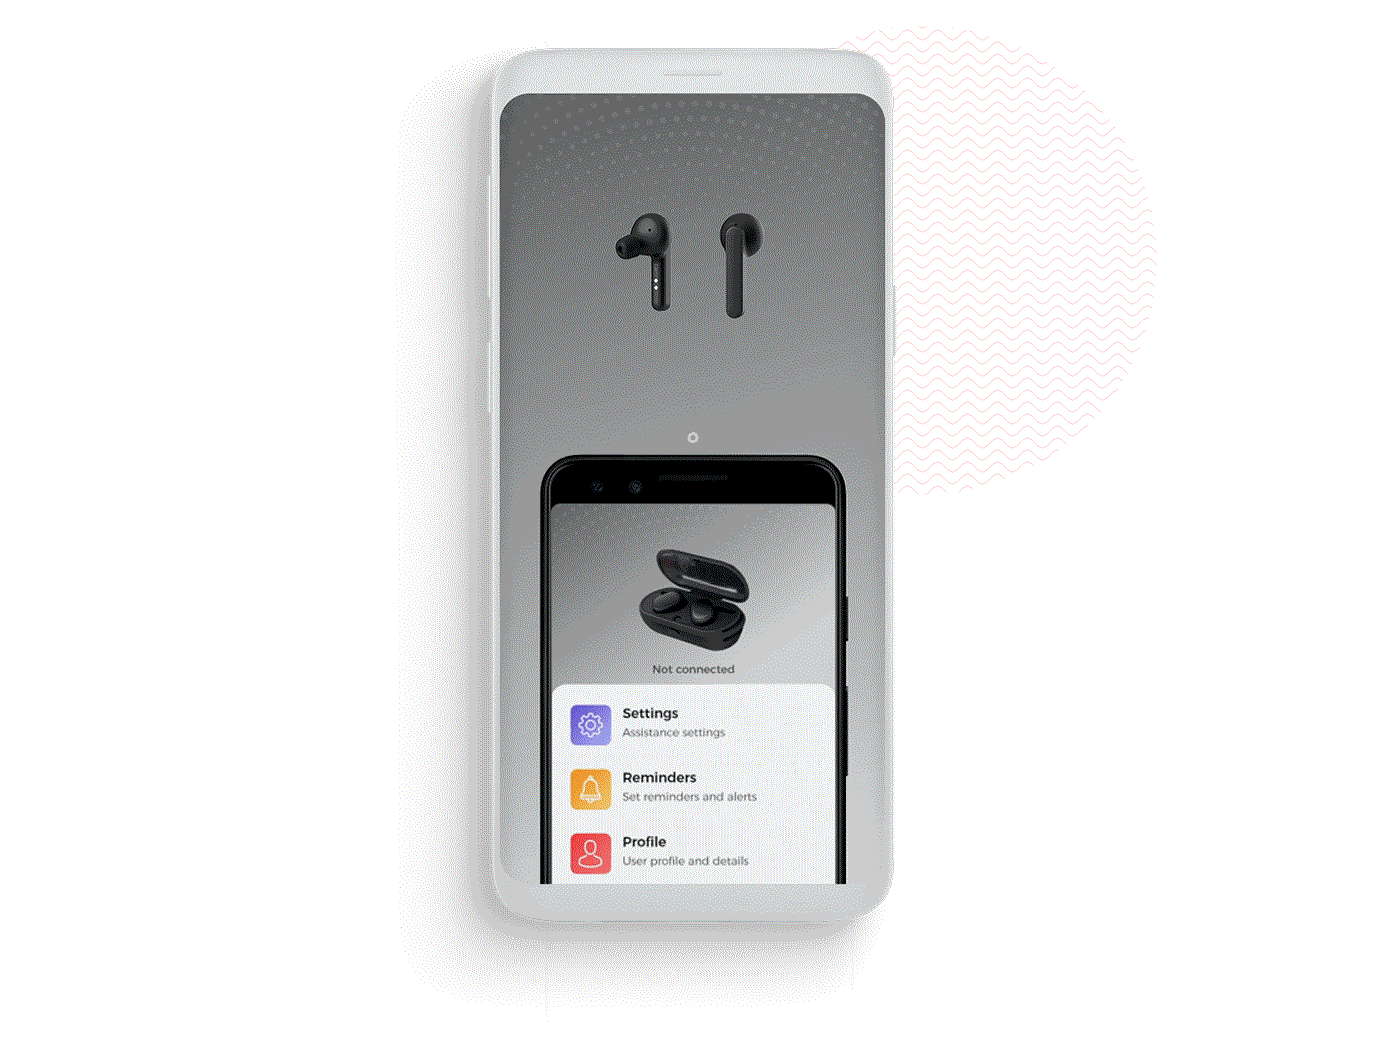 Airpod wireless user interface app user experience UI & UX pods